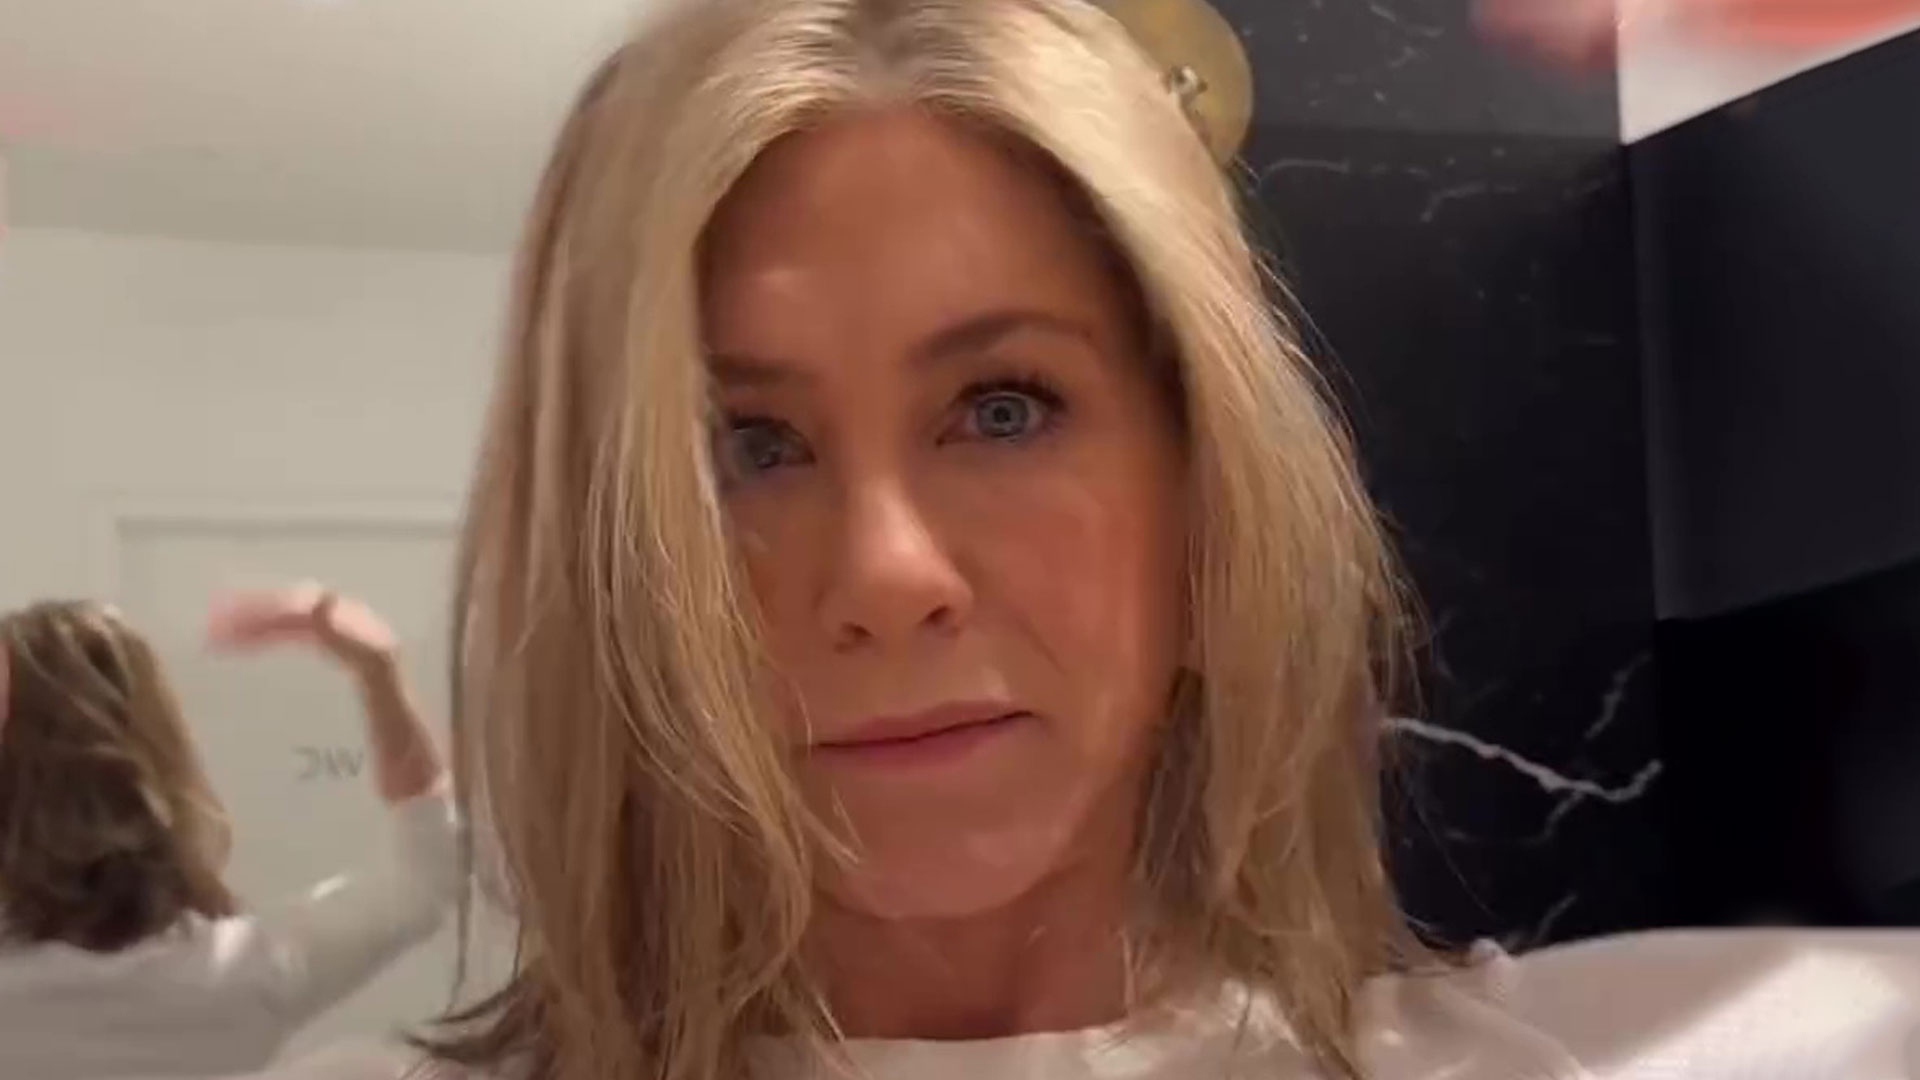 Jennifer Aniston puts on very perky display in a white top for new ad as fans joke 